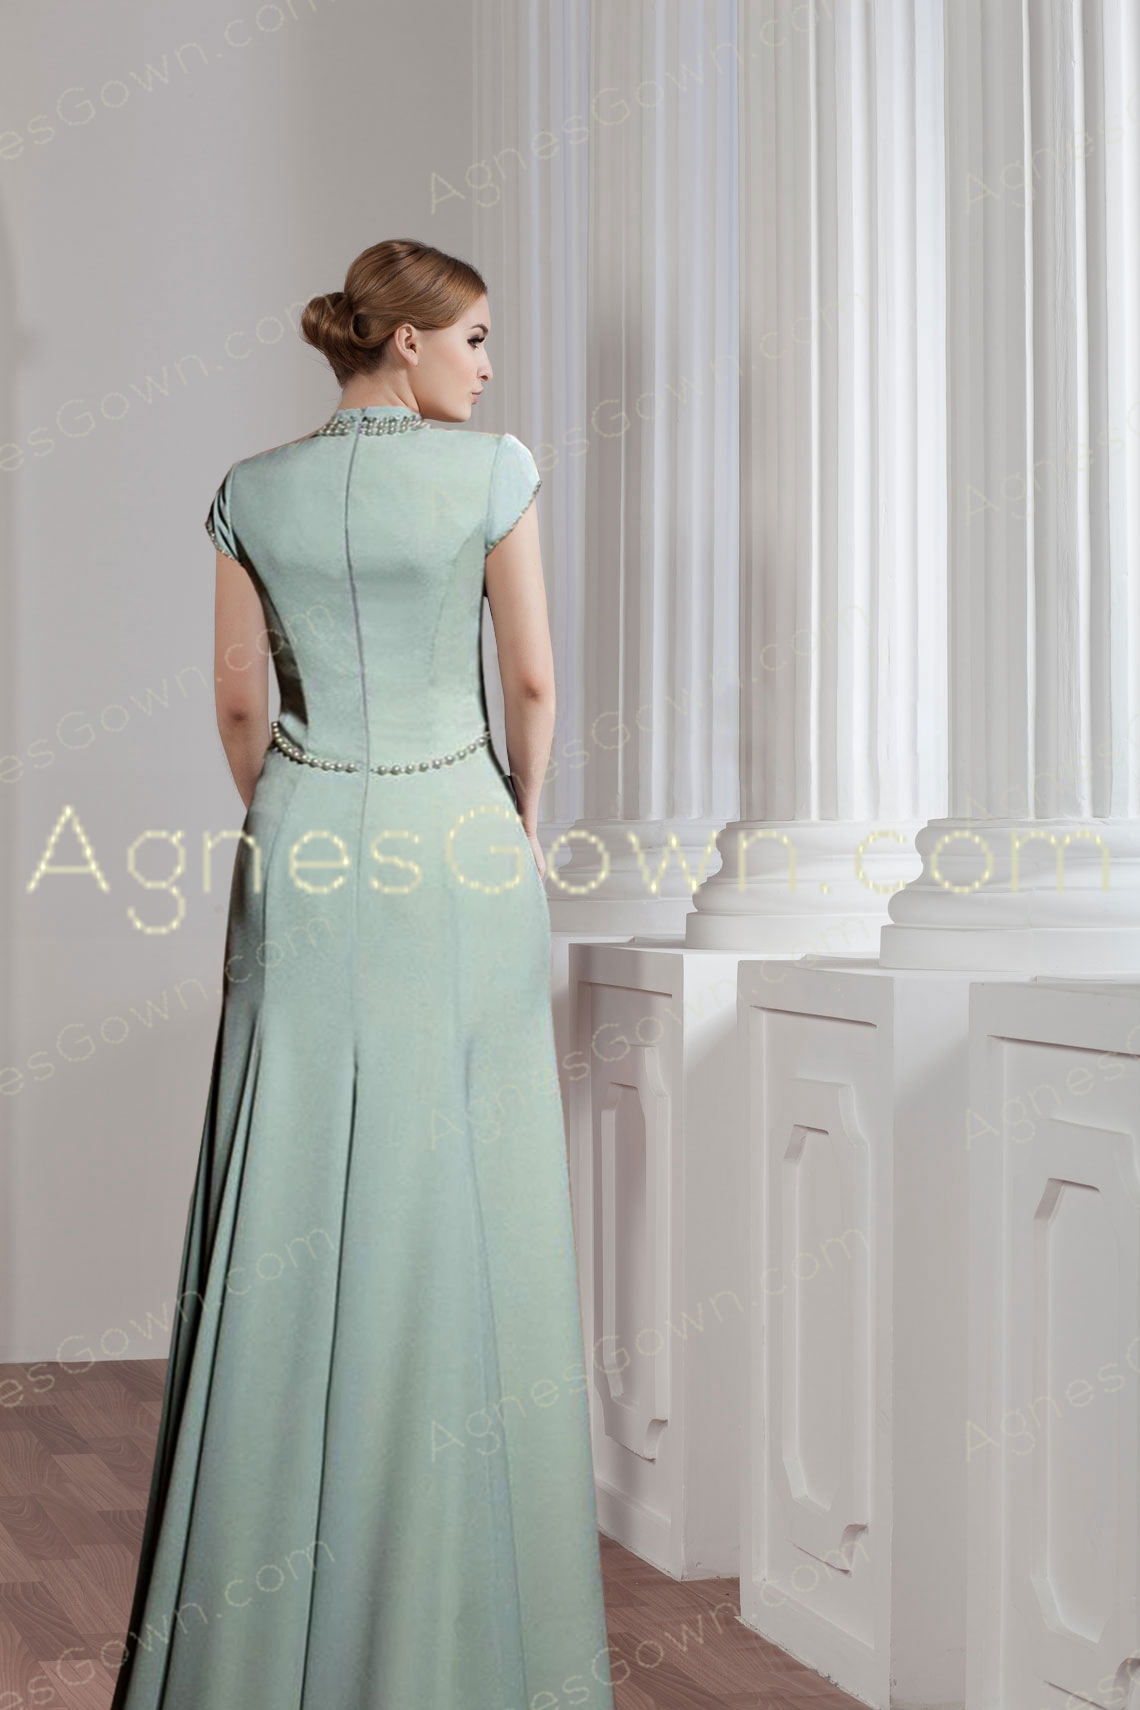 Charming High Neckline Sage Colored Mother Of The Bride Dress 